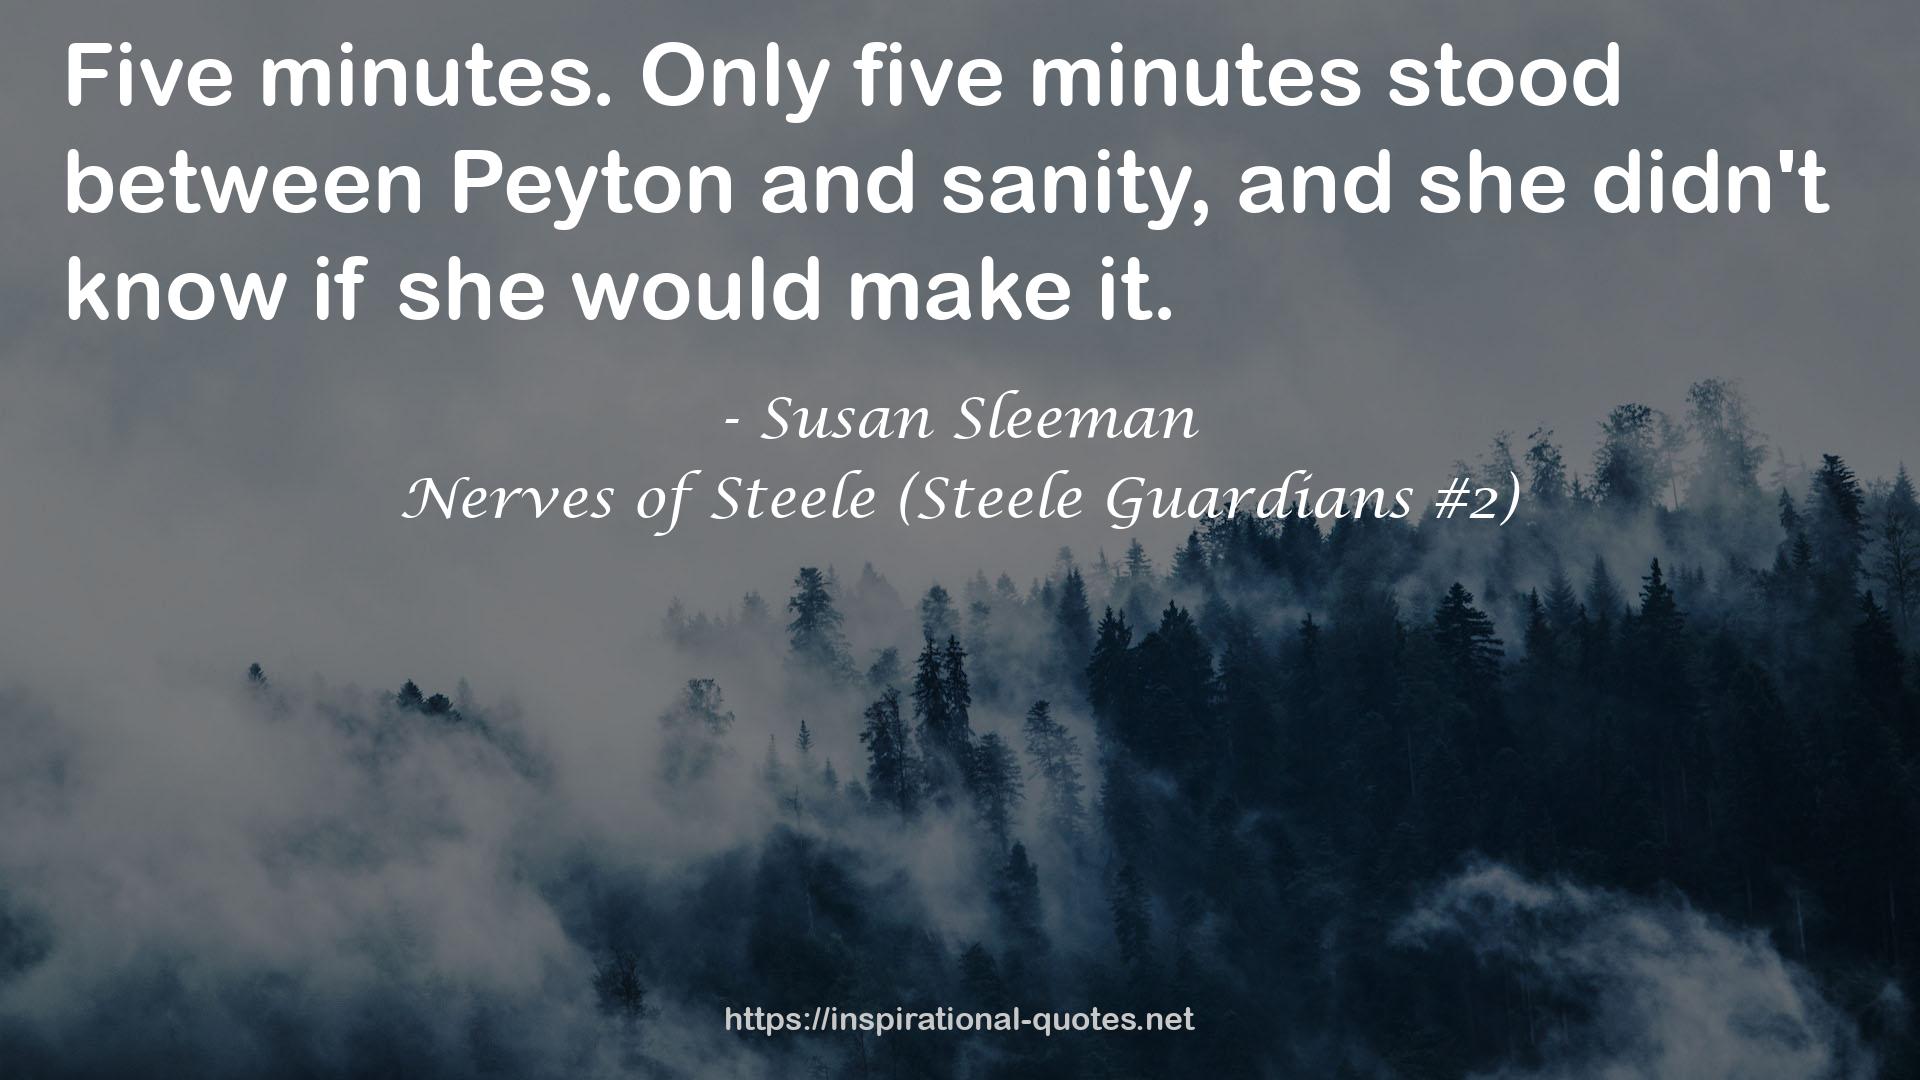 Nerves of Steele (Steele Guardians #2) QUOTES